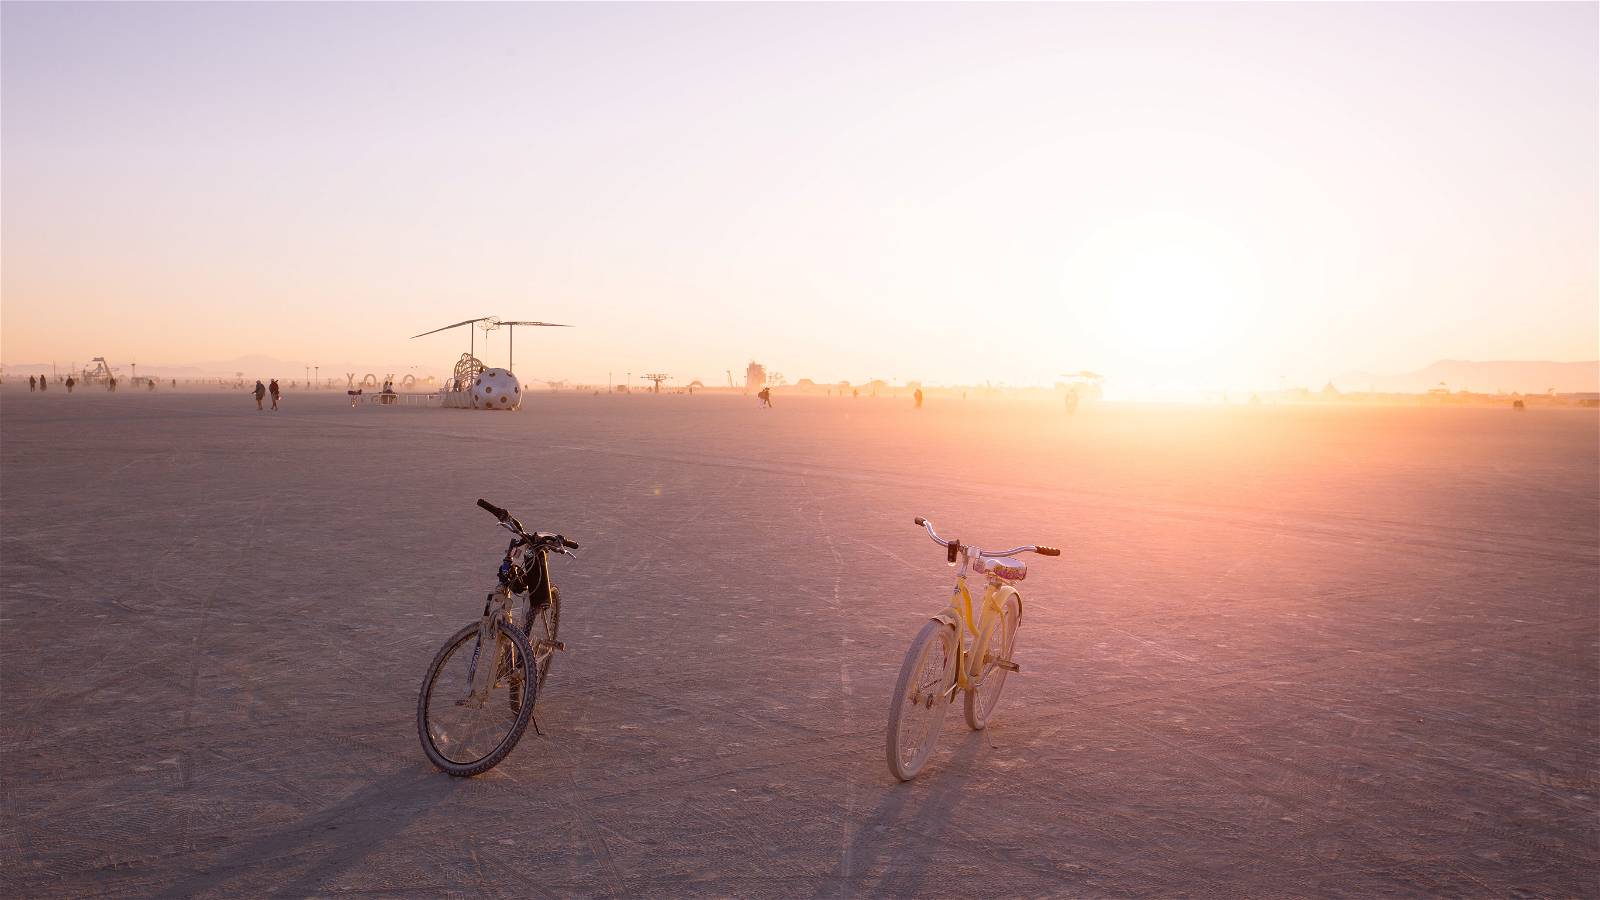 The Burning Man disaster is ‘a teachable moment’ about climate change